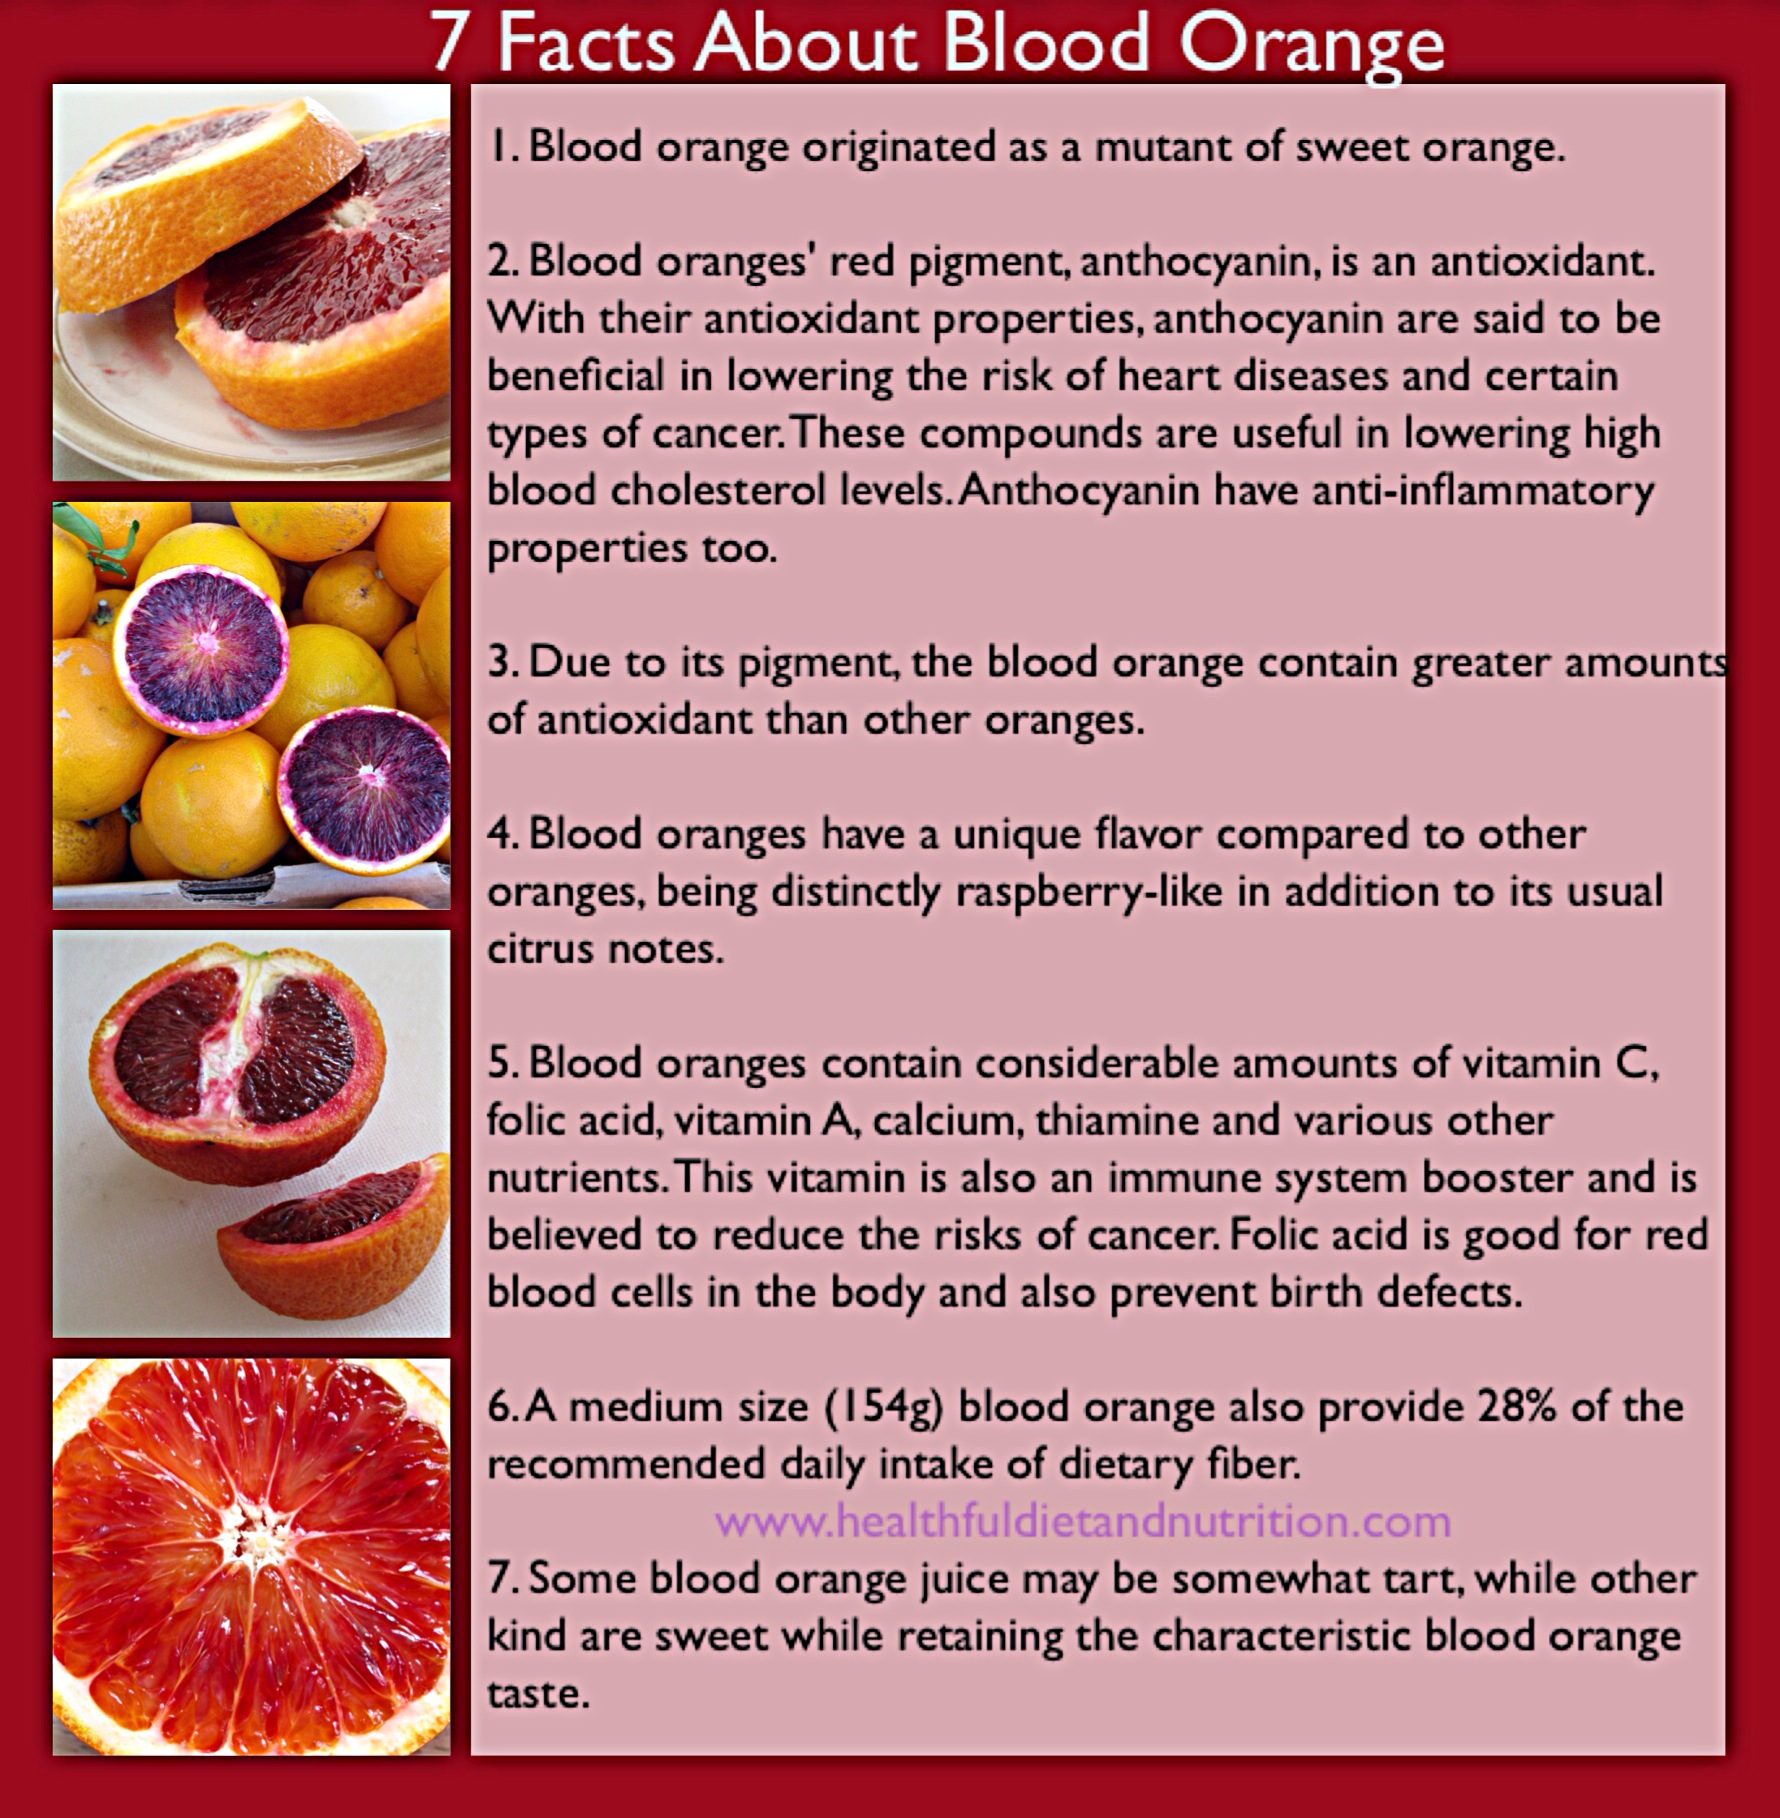 7 Facts About Blood Orange